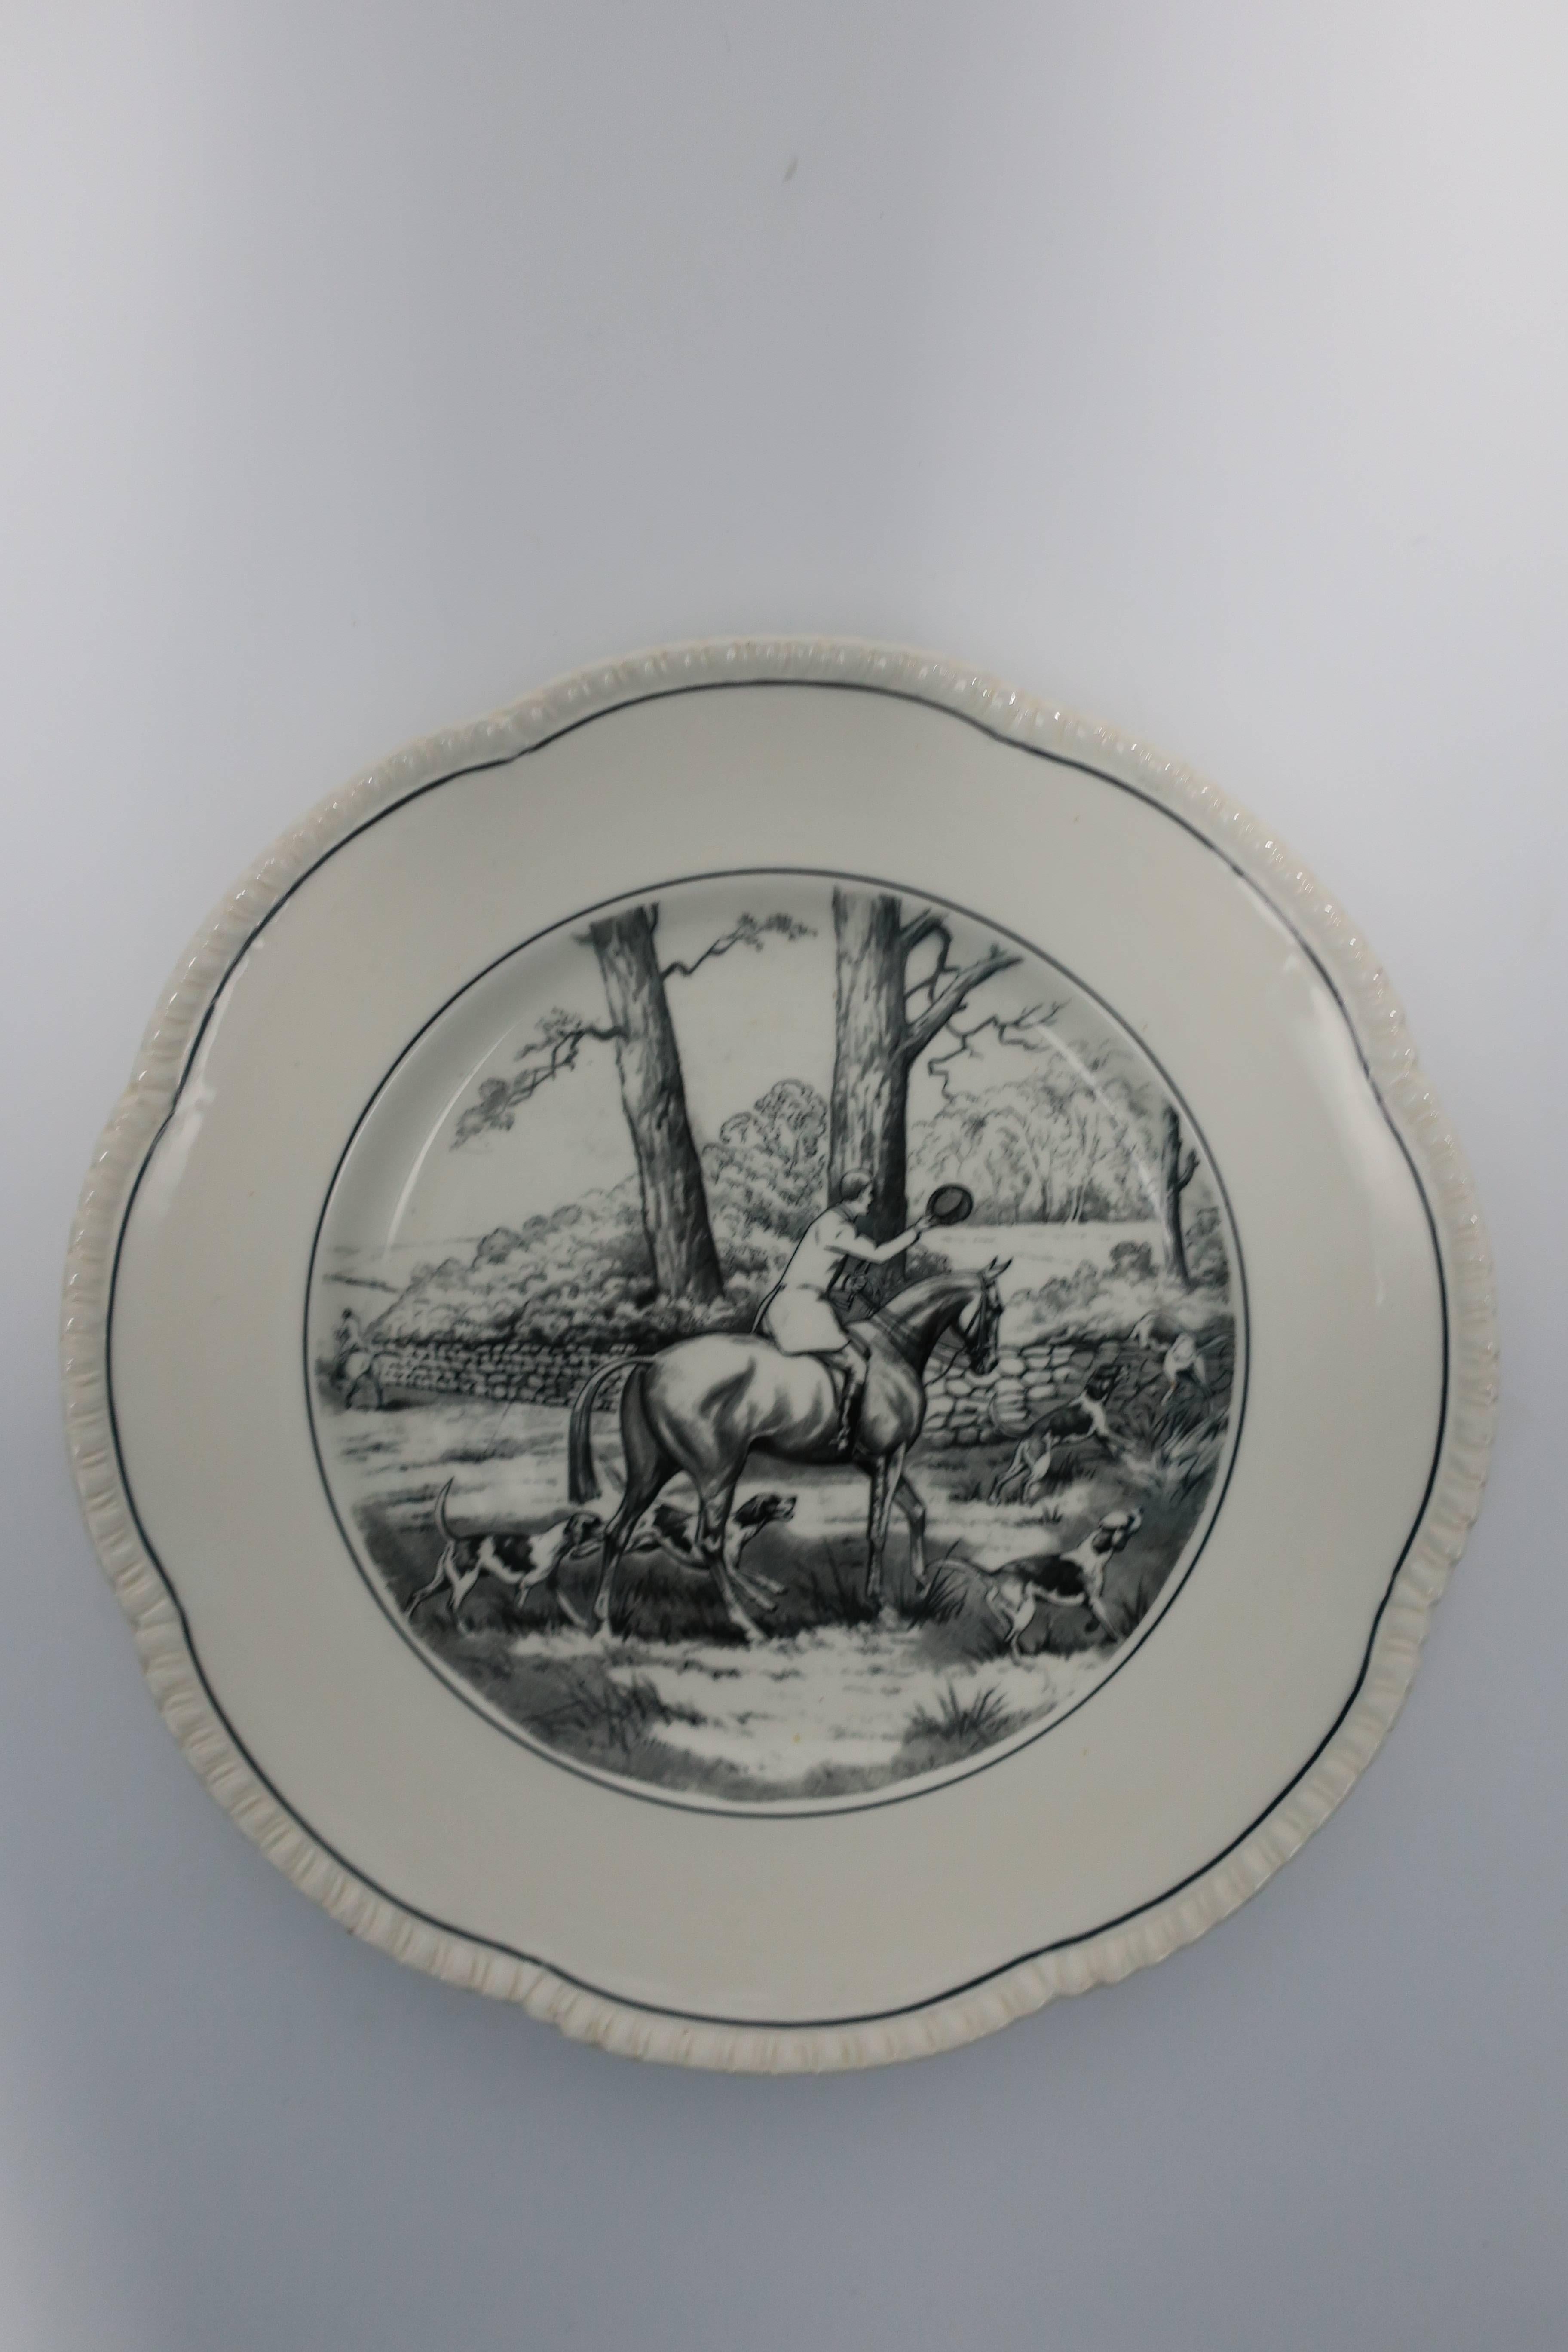 A beautiful black and white English porcelain plate depicting a country scene with horse, hunting dogs, and fowl birds. With maker's mark: Royal Caultron, England, est. 1774.

Measurements include: 10.5